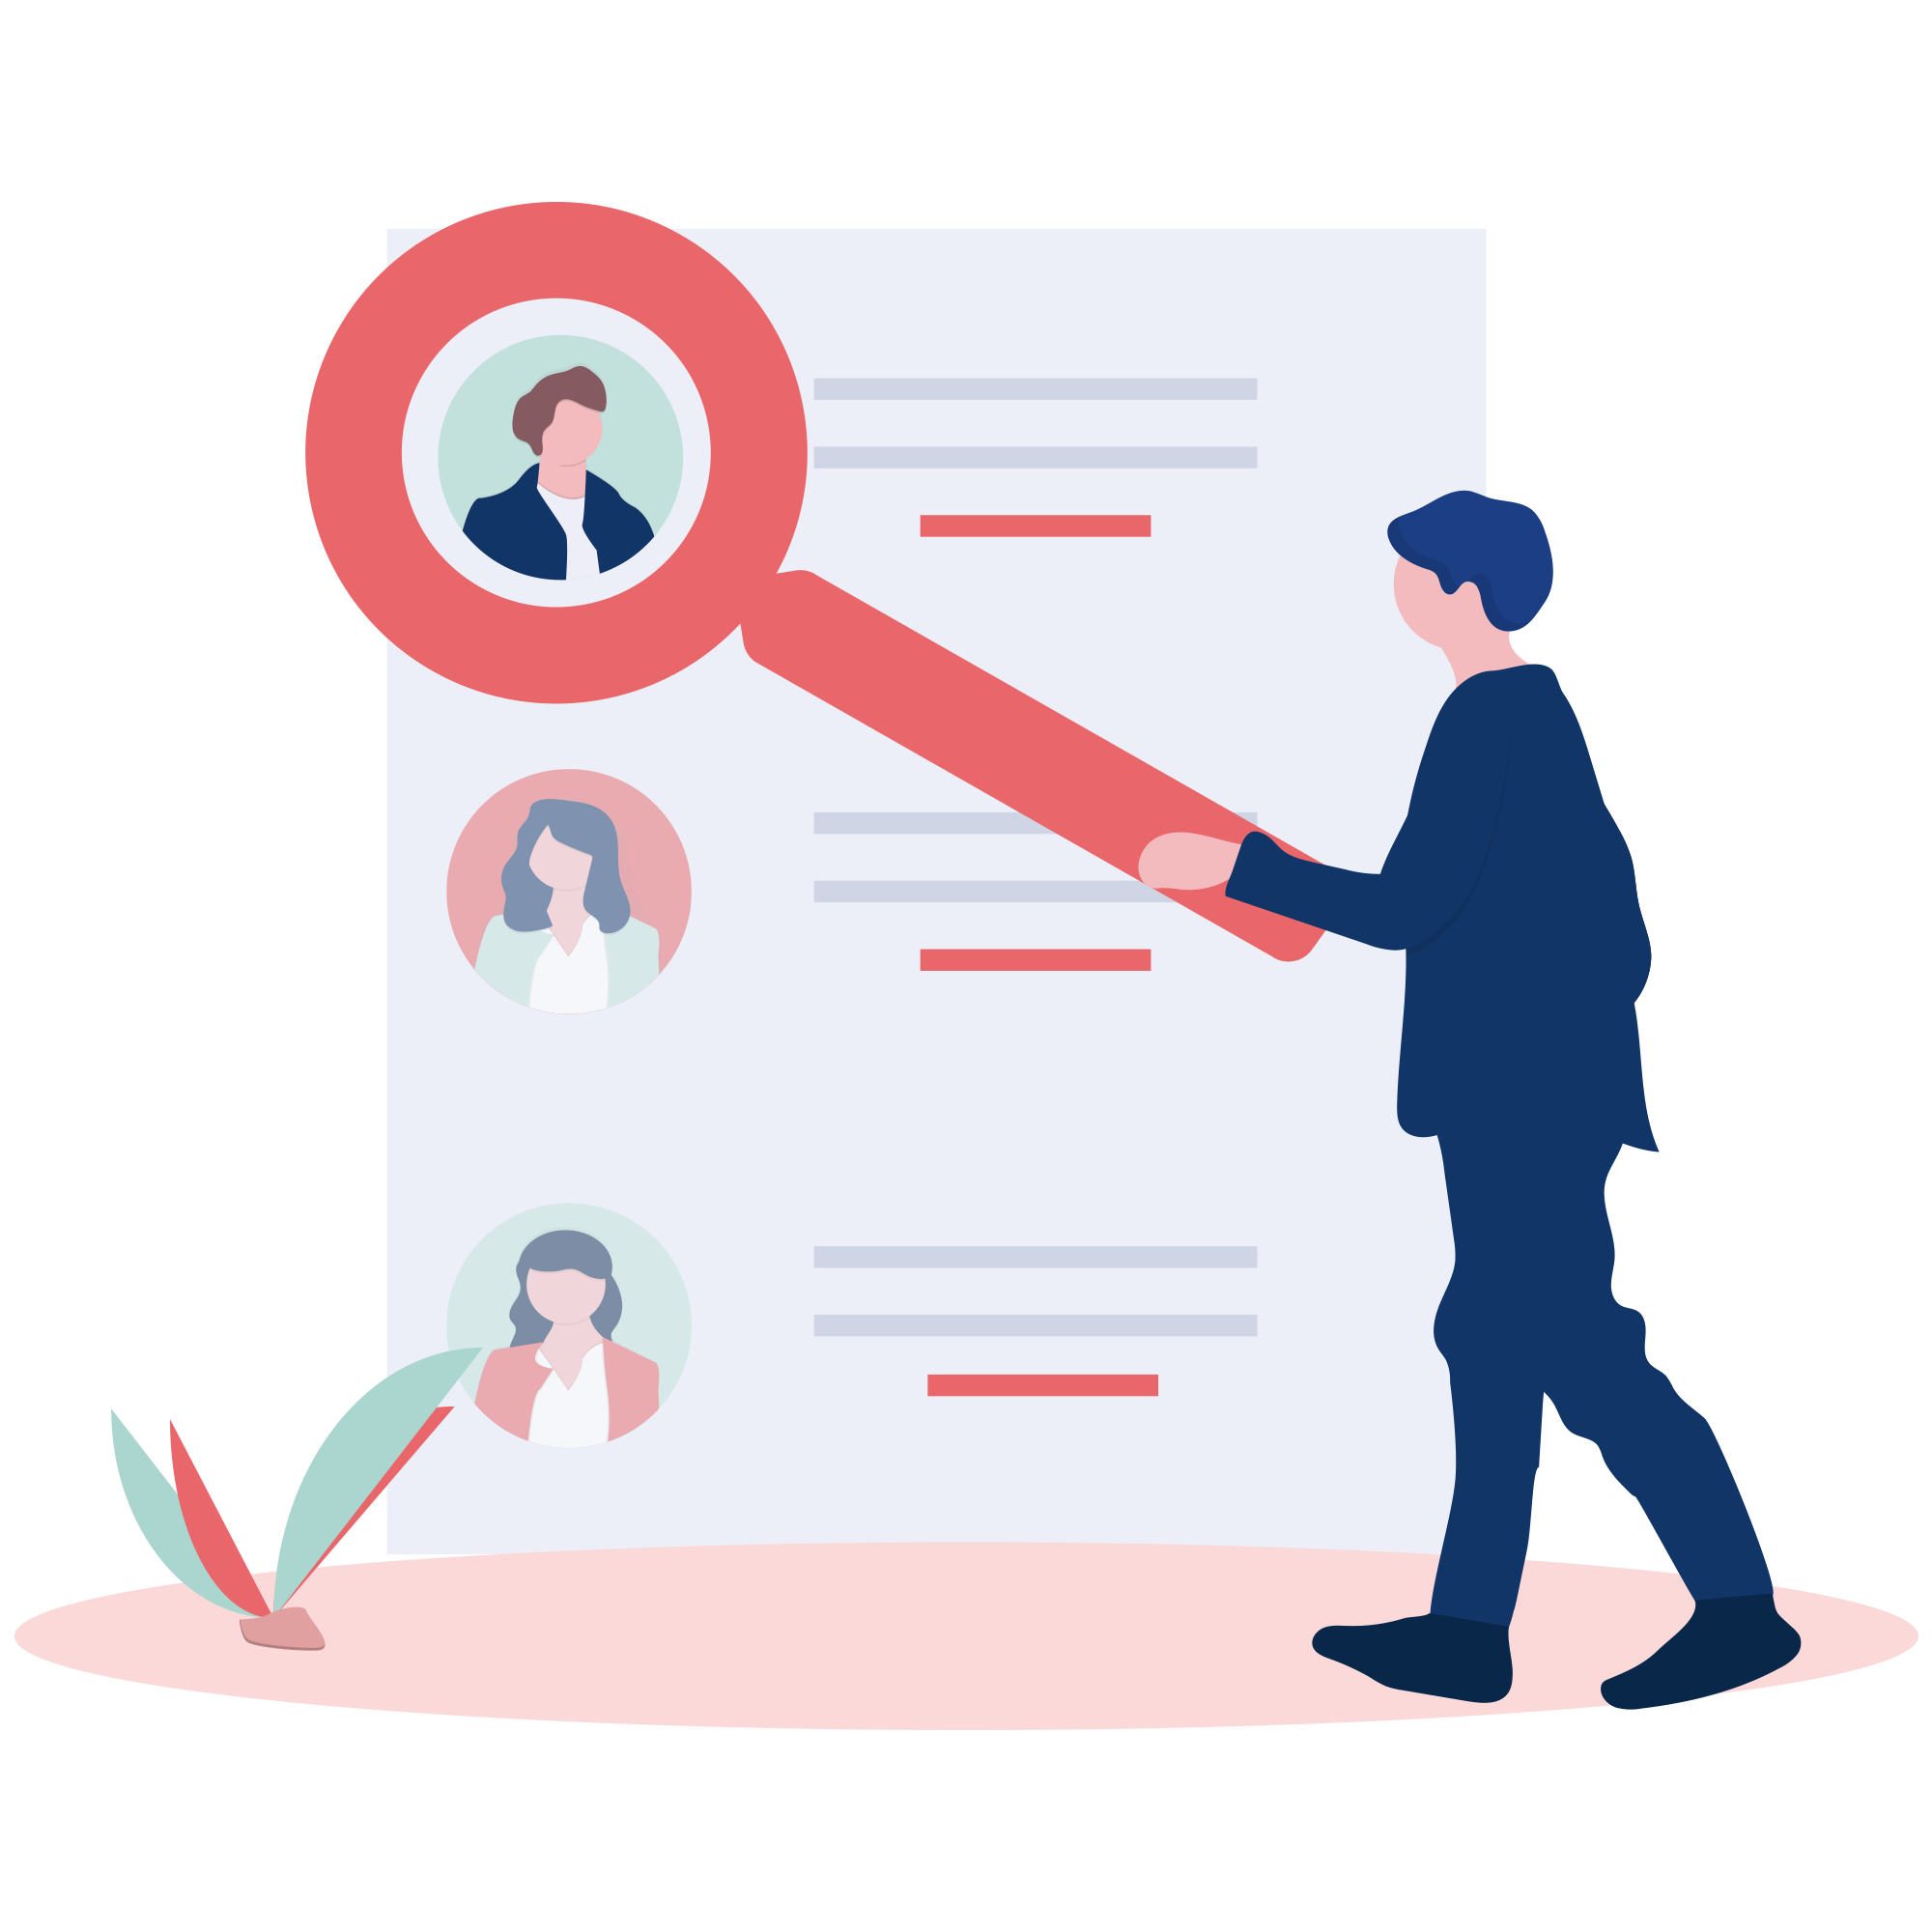 As a recruiter, it's essential to streamline your hiring process and make it candidate-friendly. Zia understands this and registers candidates automatically to your Candidate Portal. Being optimized for mobile browsers, Zia can help you grow your talent pool passively by recording and storing candidate data with their consent. Zia rates and screens the candidate's profile and creates a record in your Zoho Recruit account.